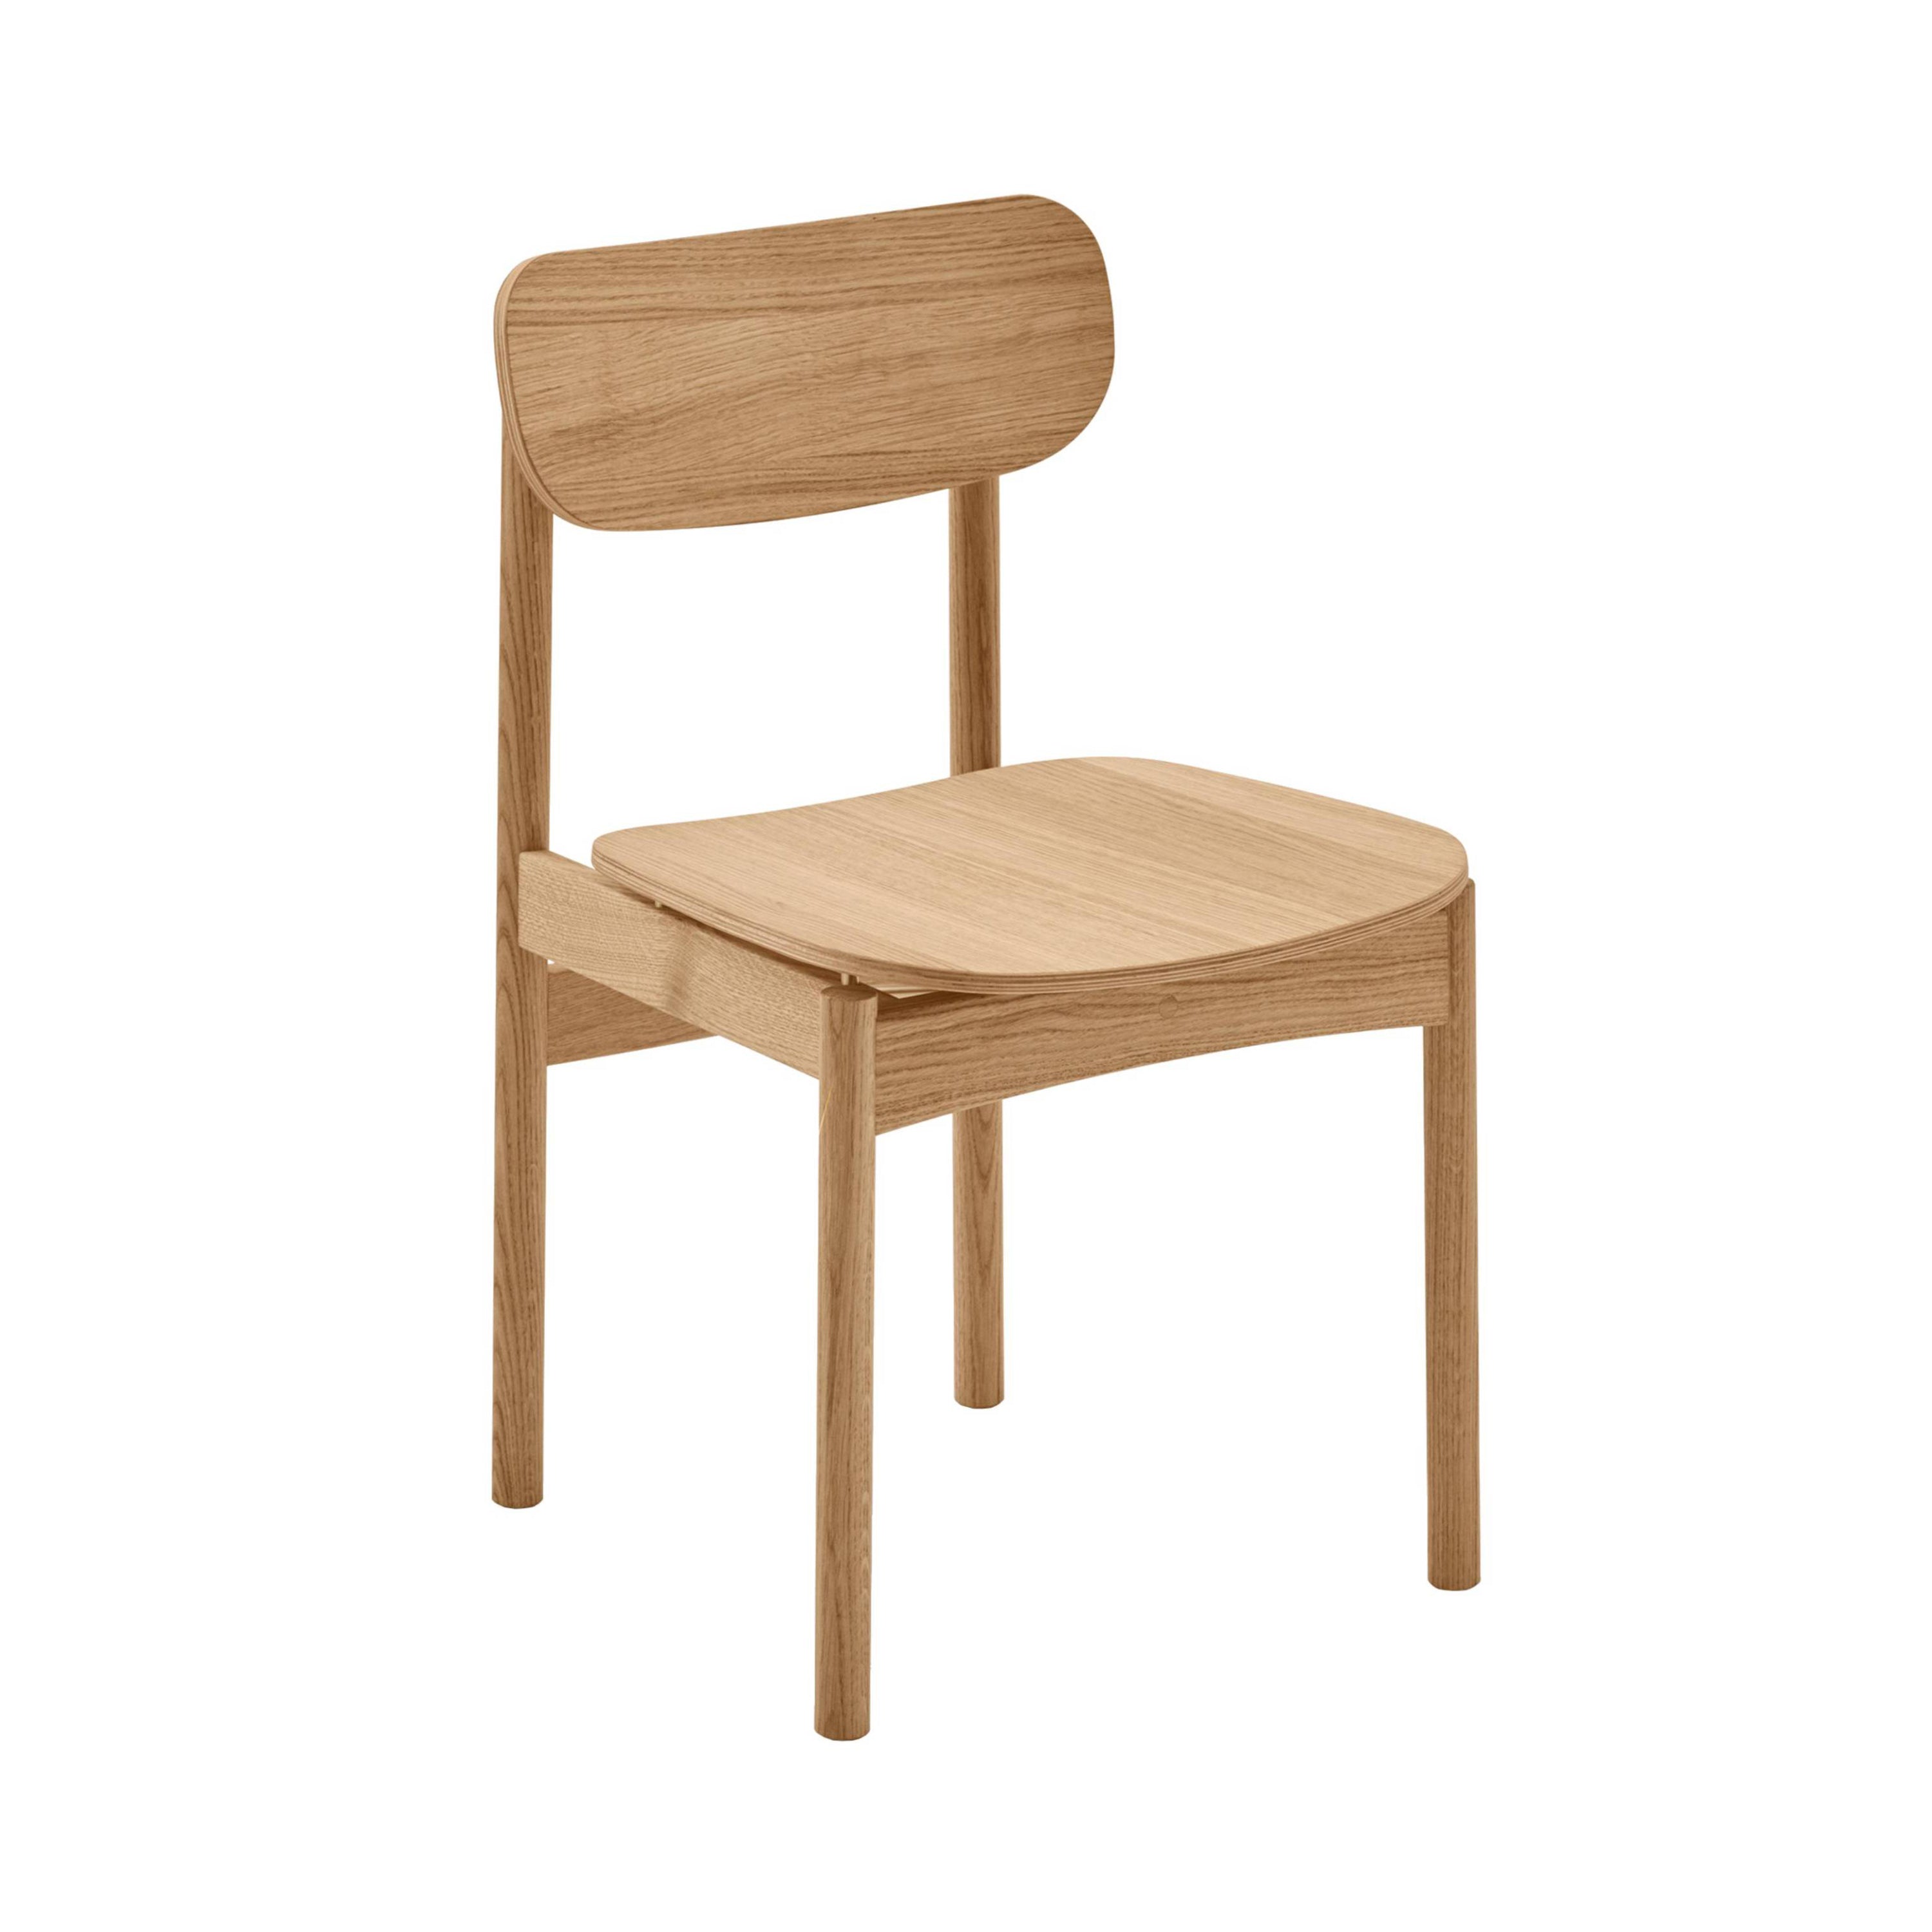 Vester Chair: Without Cushion